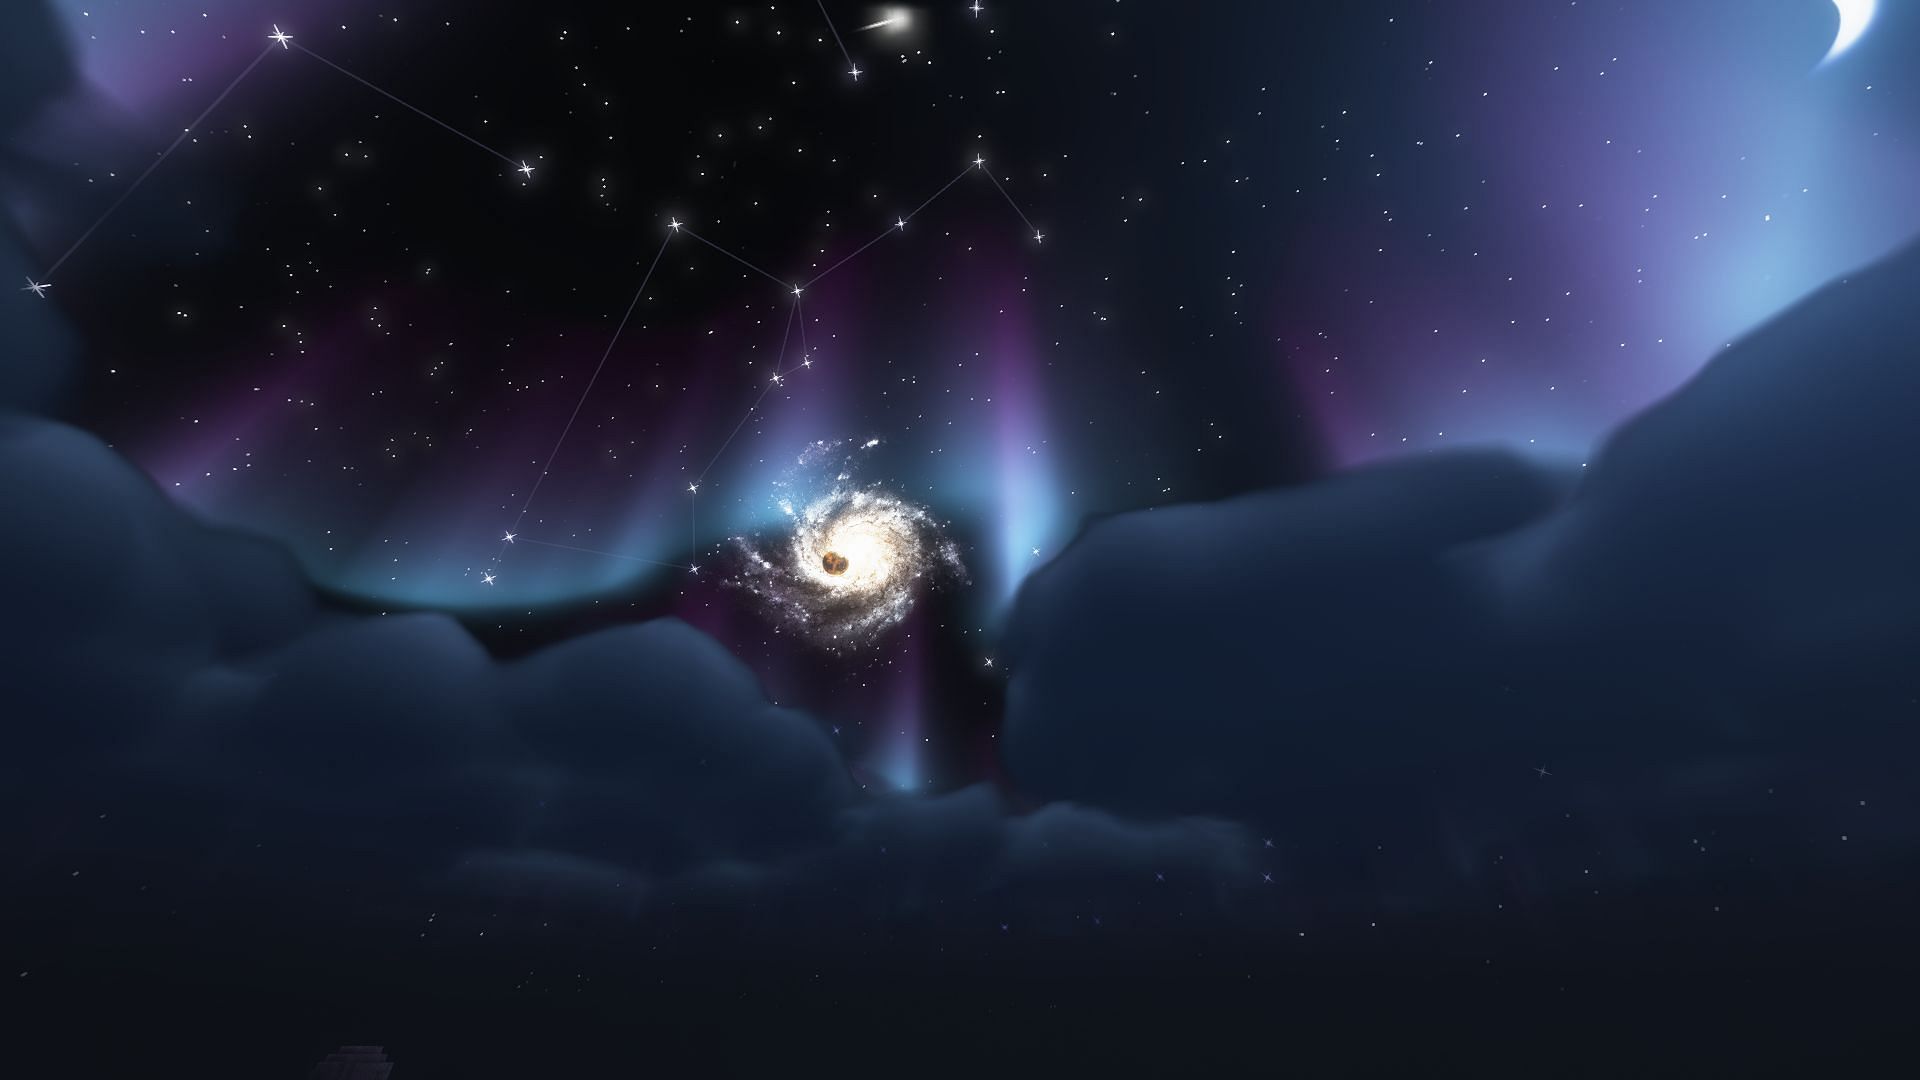 Night sky with astralex shaders in version 1.20 (Image via Mojang)